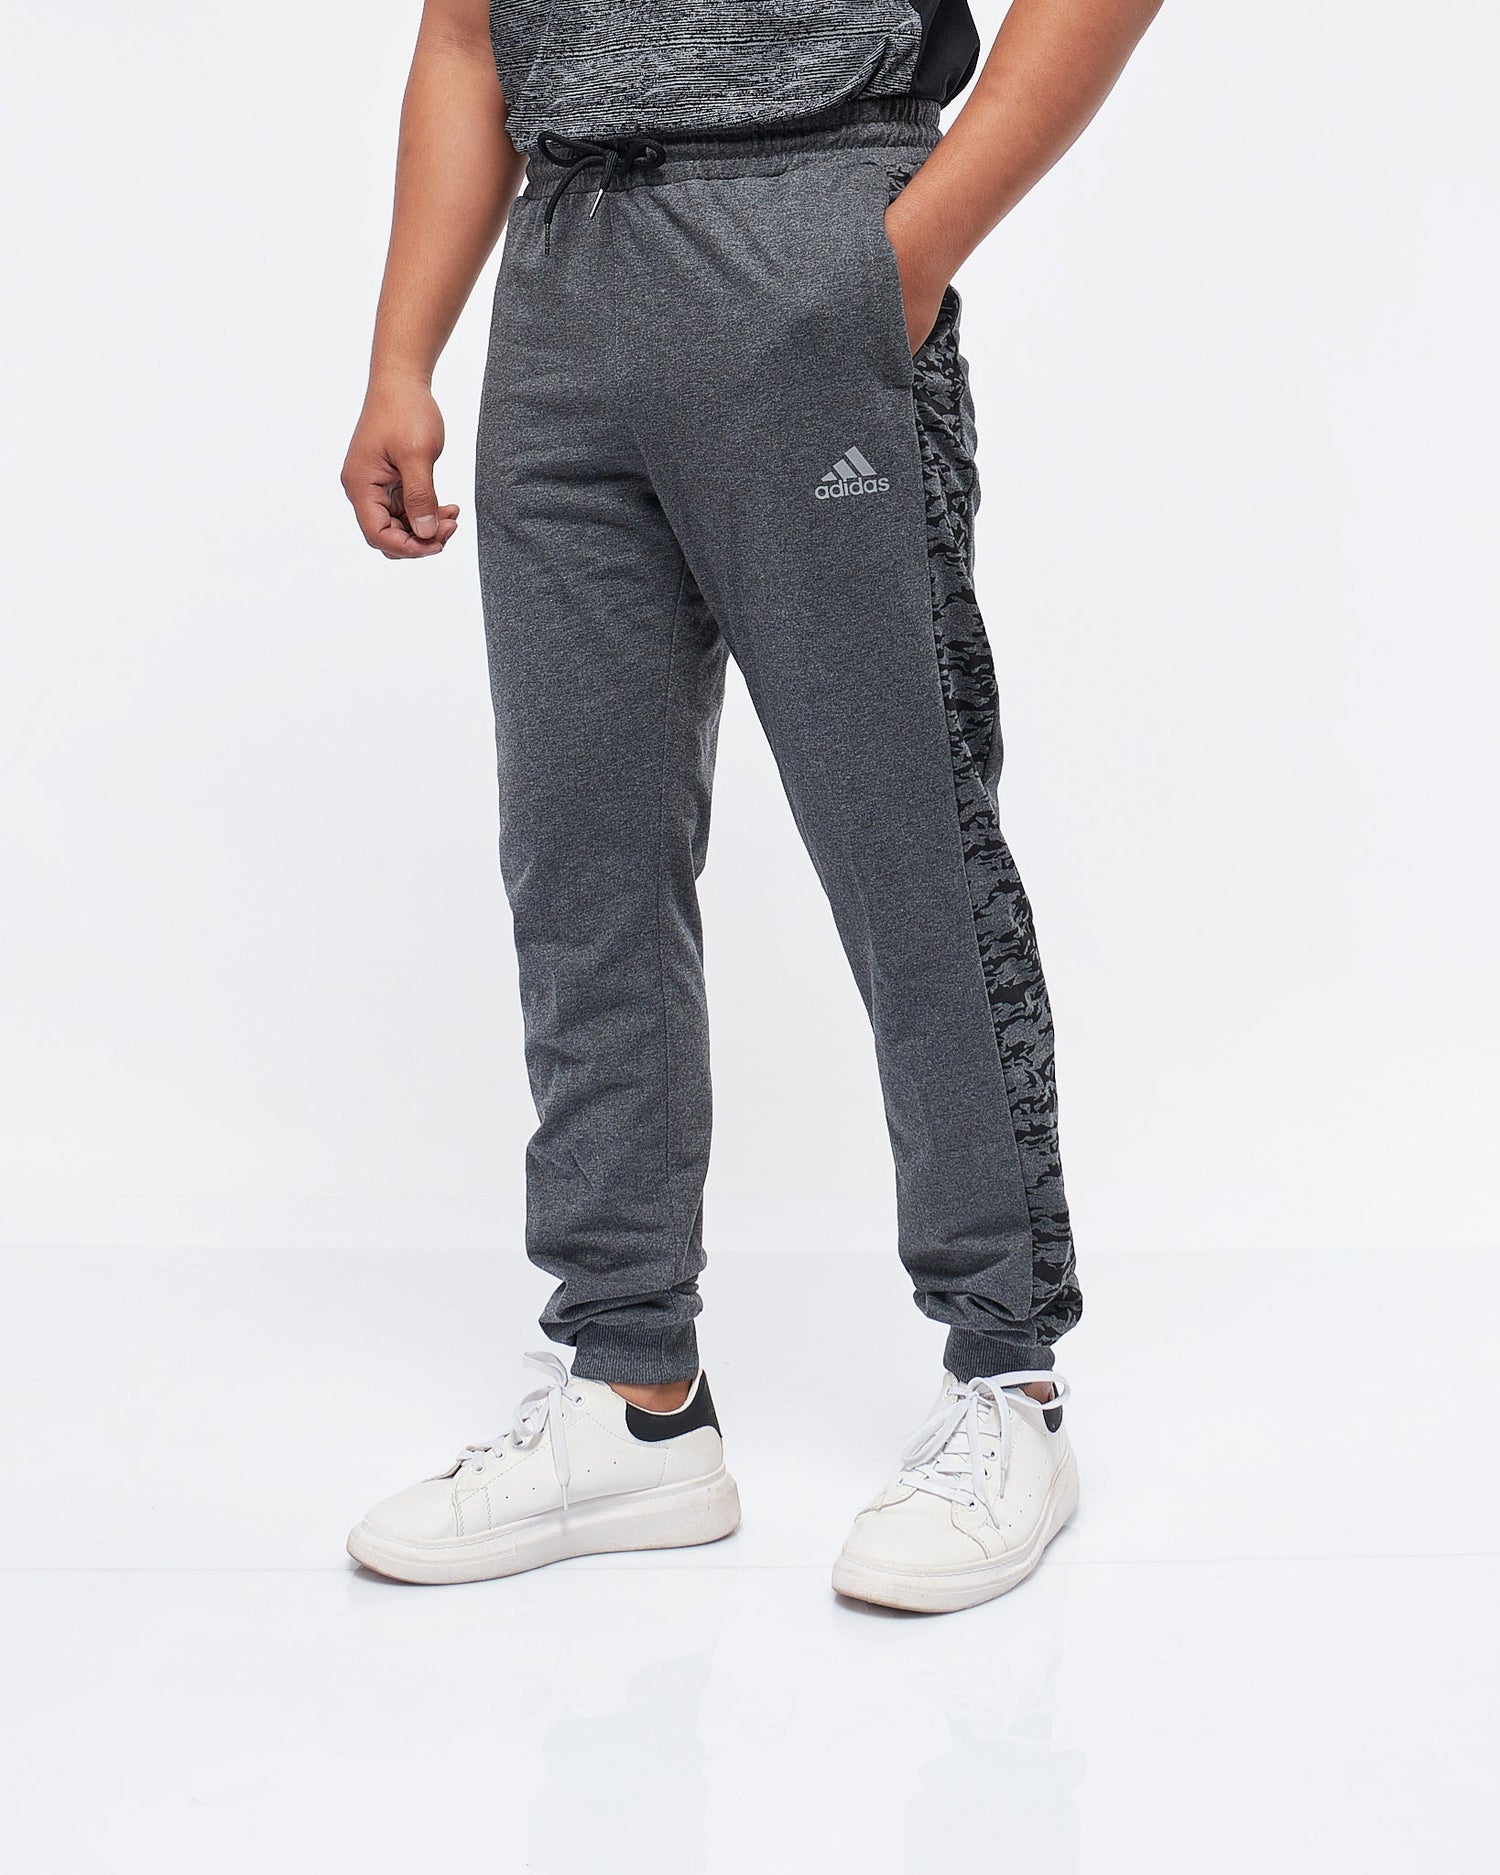 MOI OUTFIT-Leopard Side Striped Men Joggers 18.90